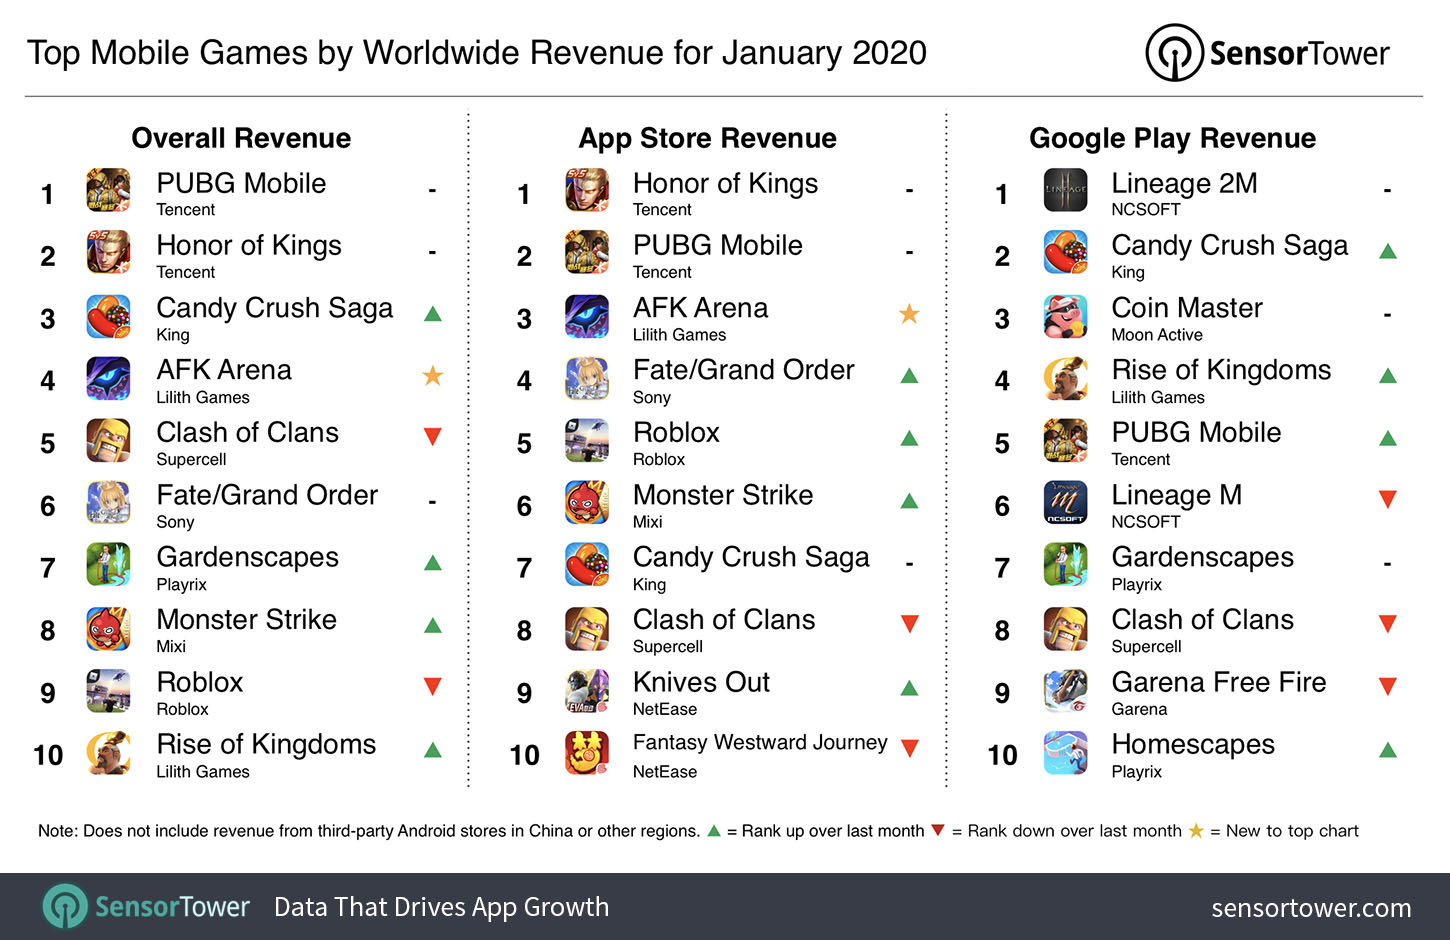 top-mobile-games-by-worldwide-revenue-january-2020.jpg